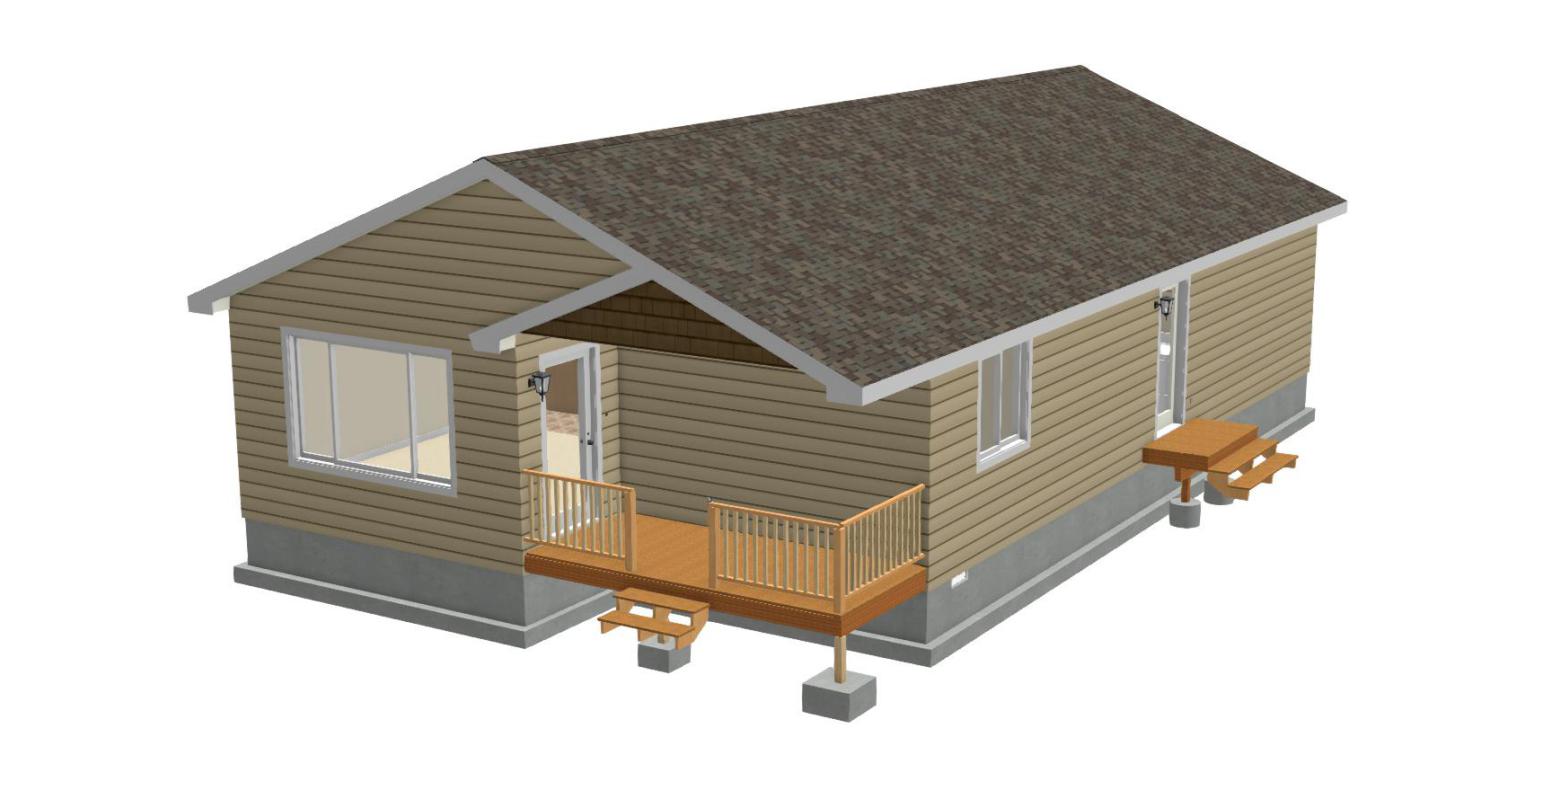 The Kelly II modular home is small in size but mighty in character.  The optional deck in front is a wonderful spot for sitting outside and enjoying the day.